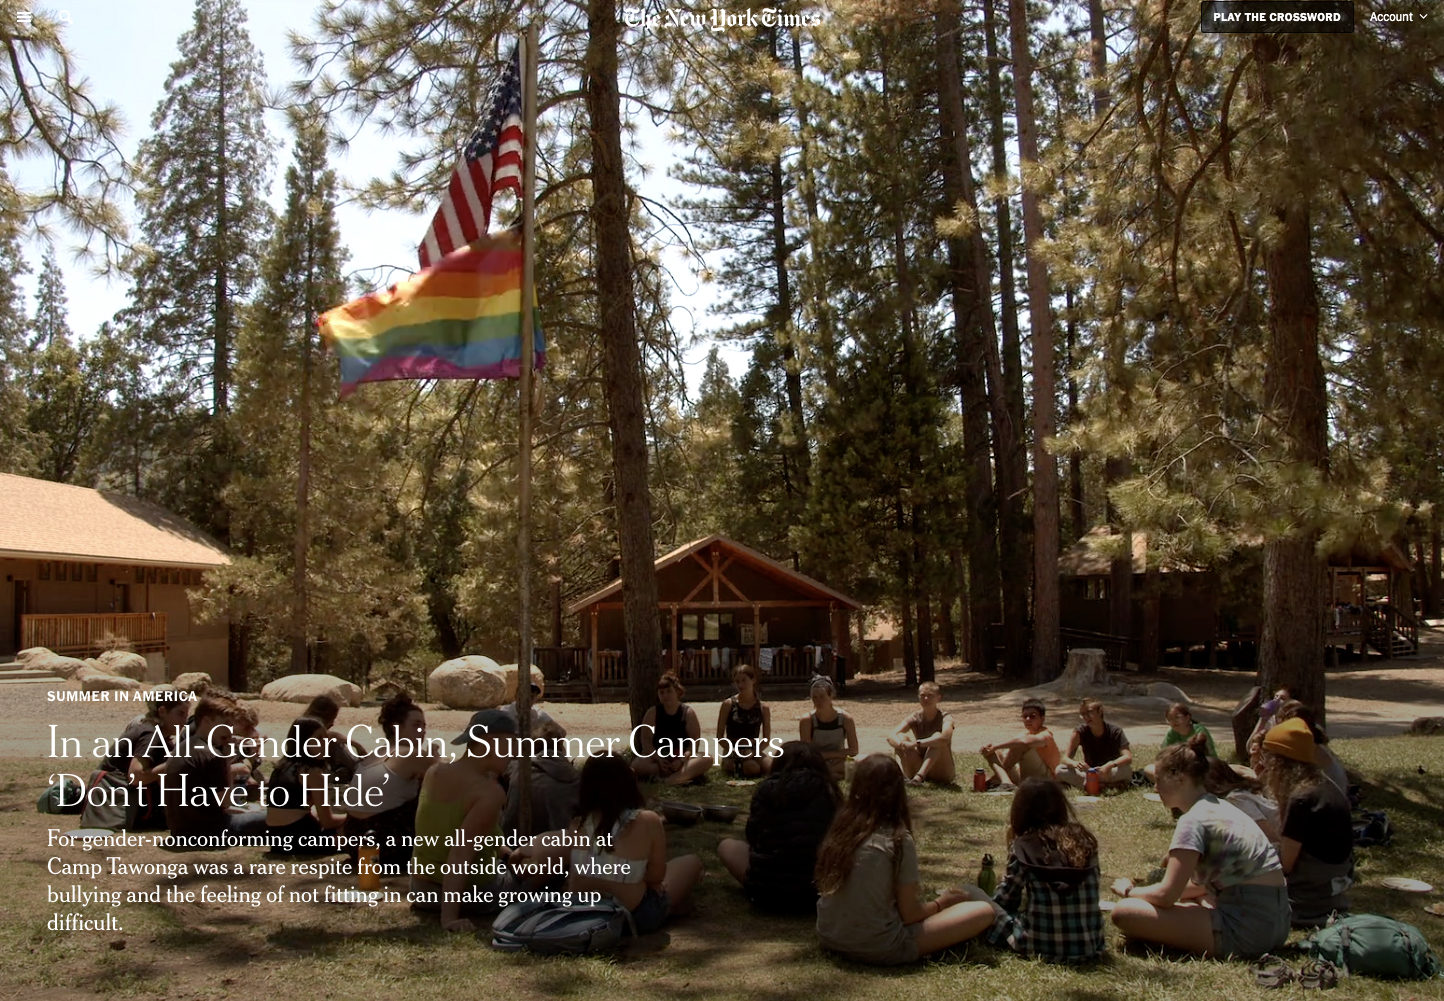 In an All-Gender Cabin, Summer Campers ‘Don’t Have to Hide’